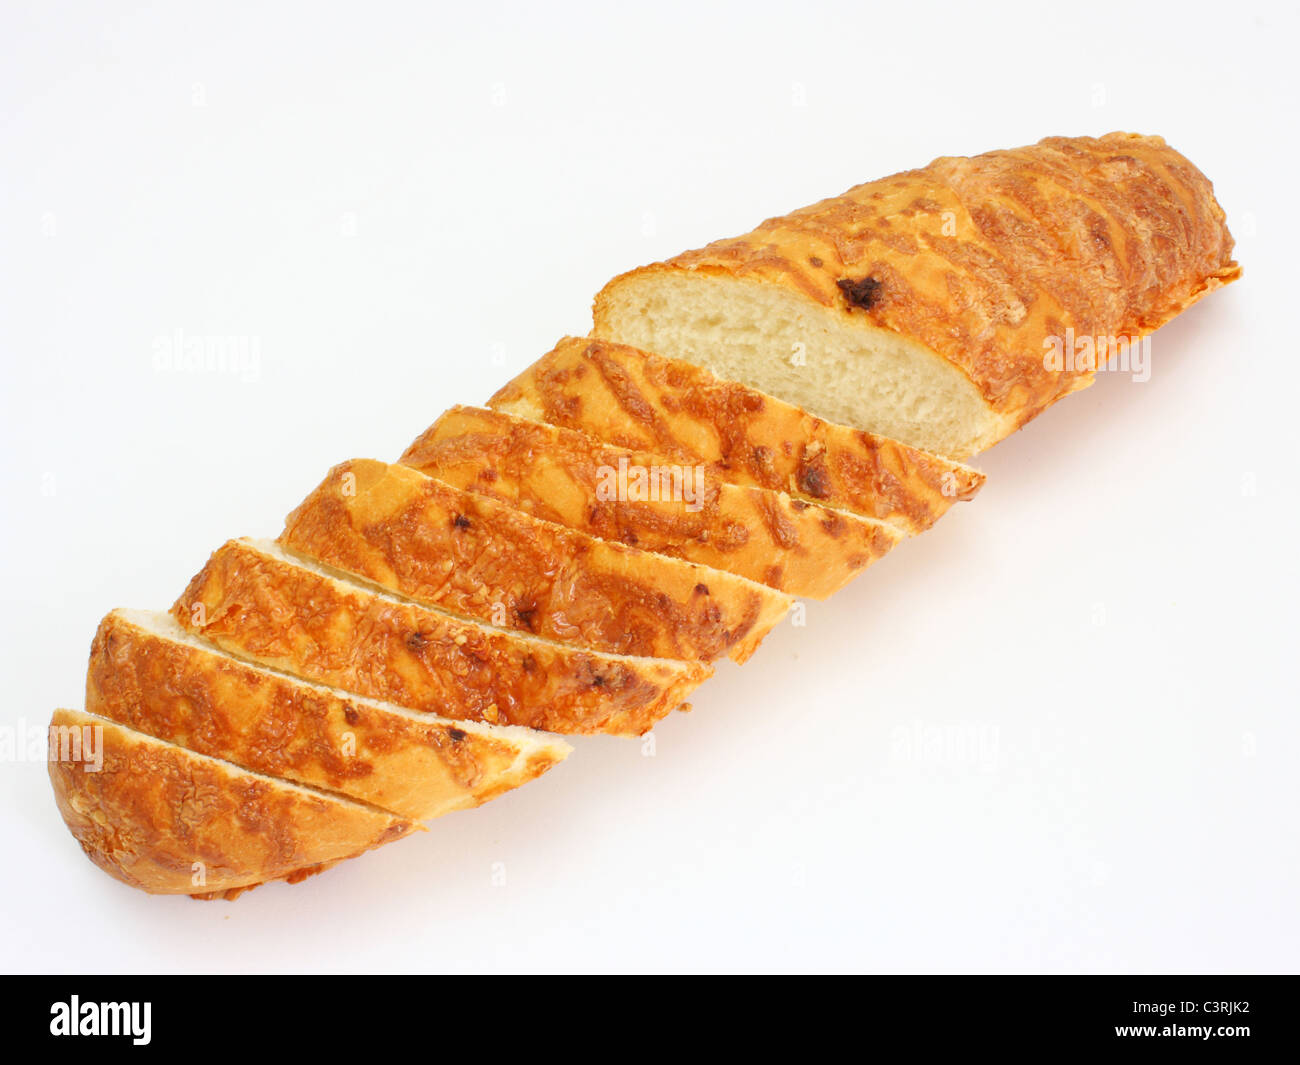 The ruddy long loaf of bread is strewed by cheese isolated on a white background Stock Photo